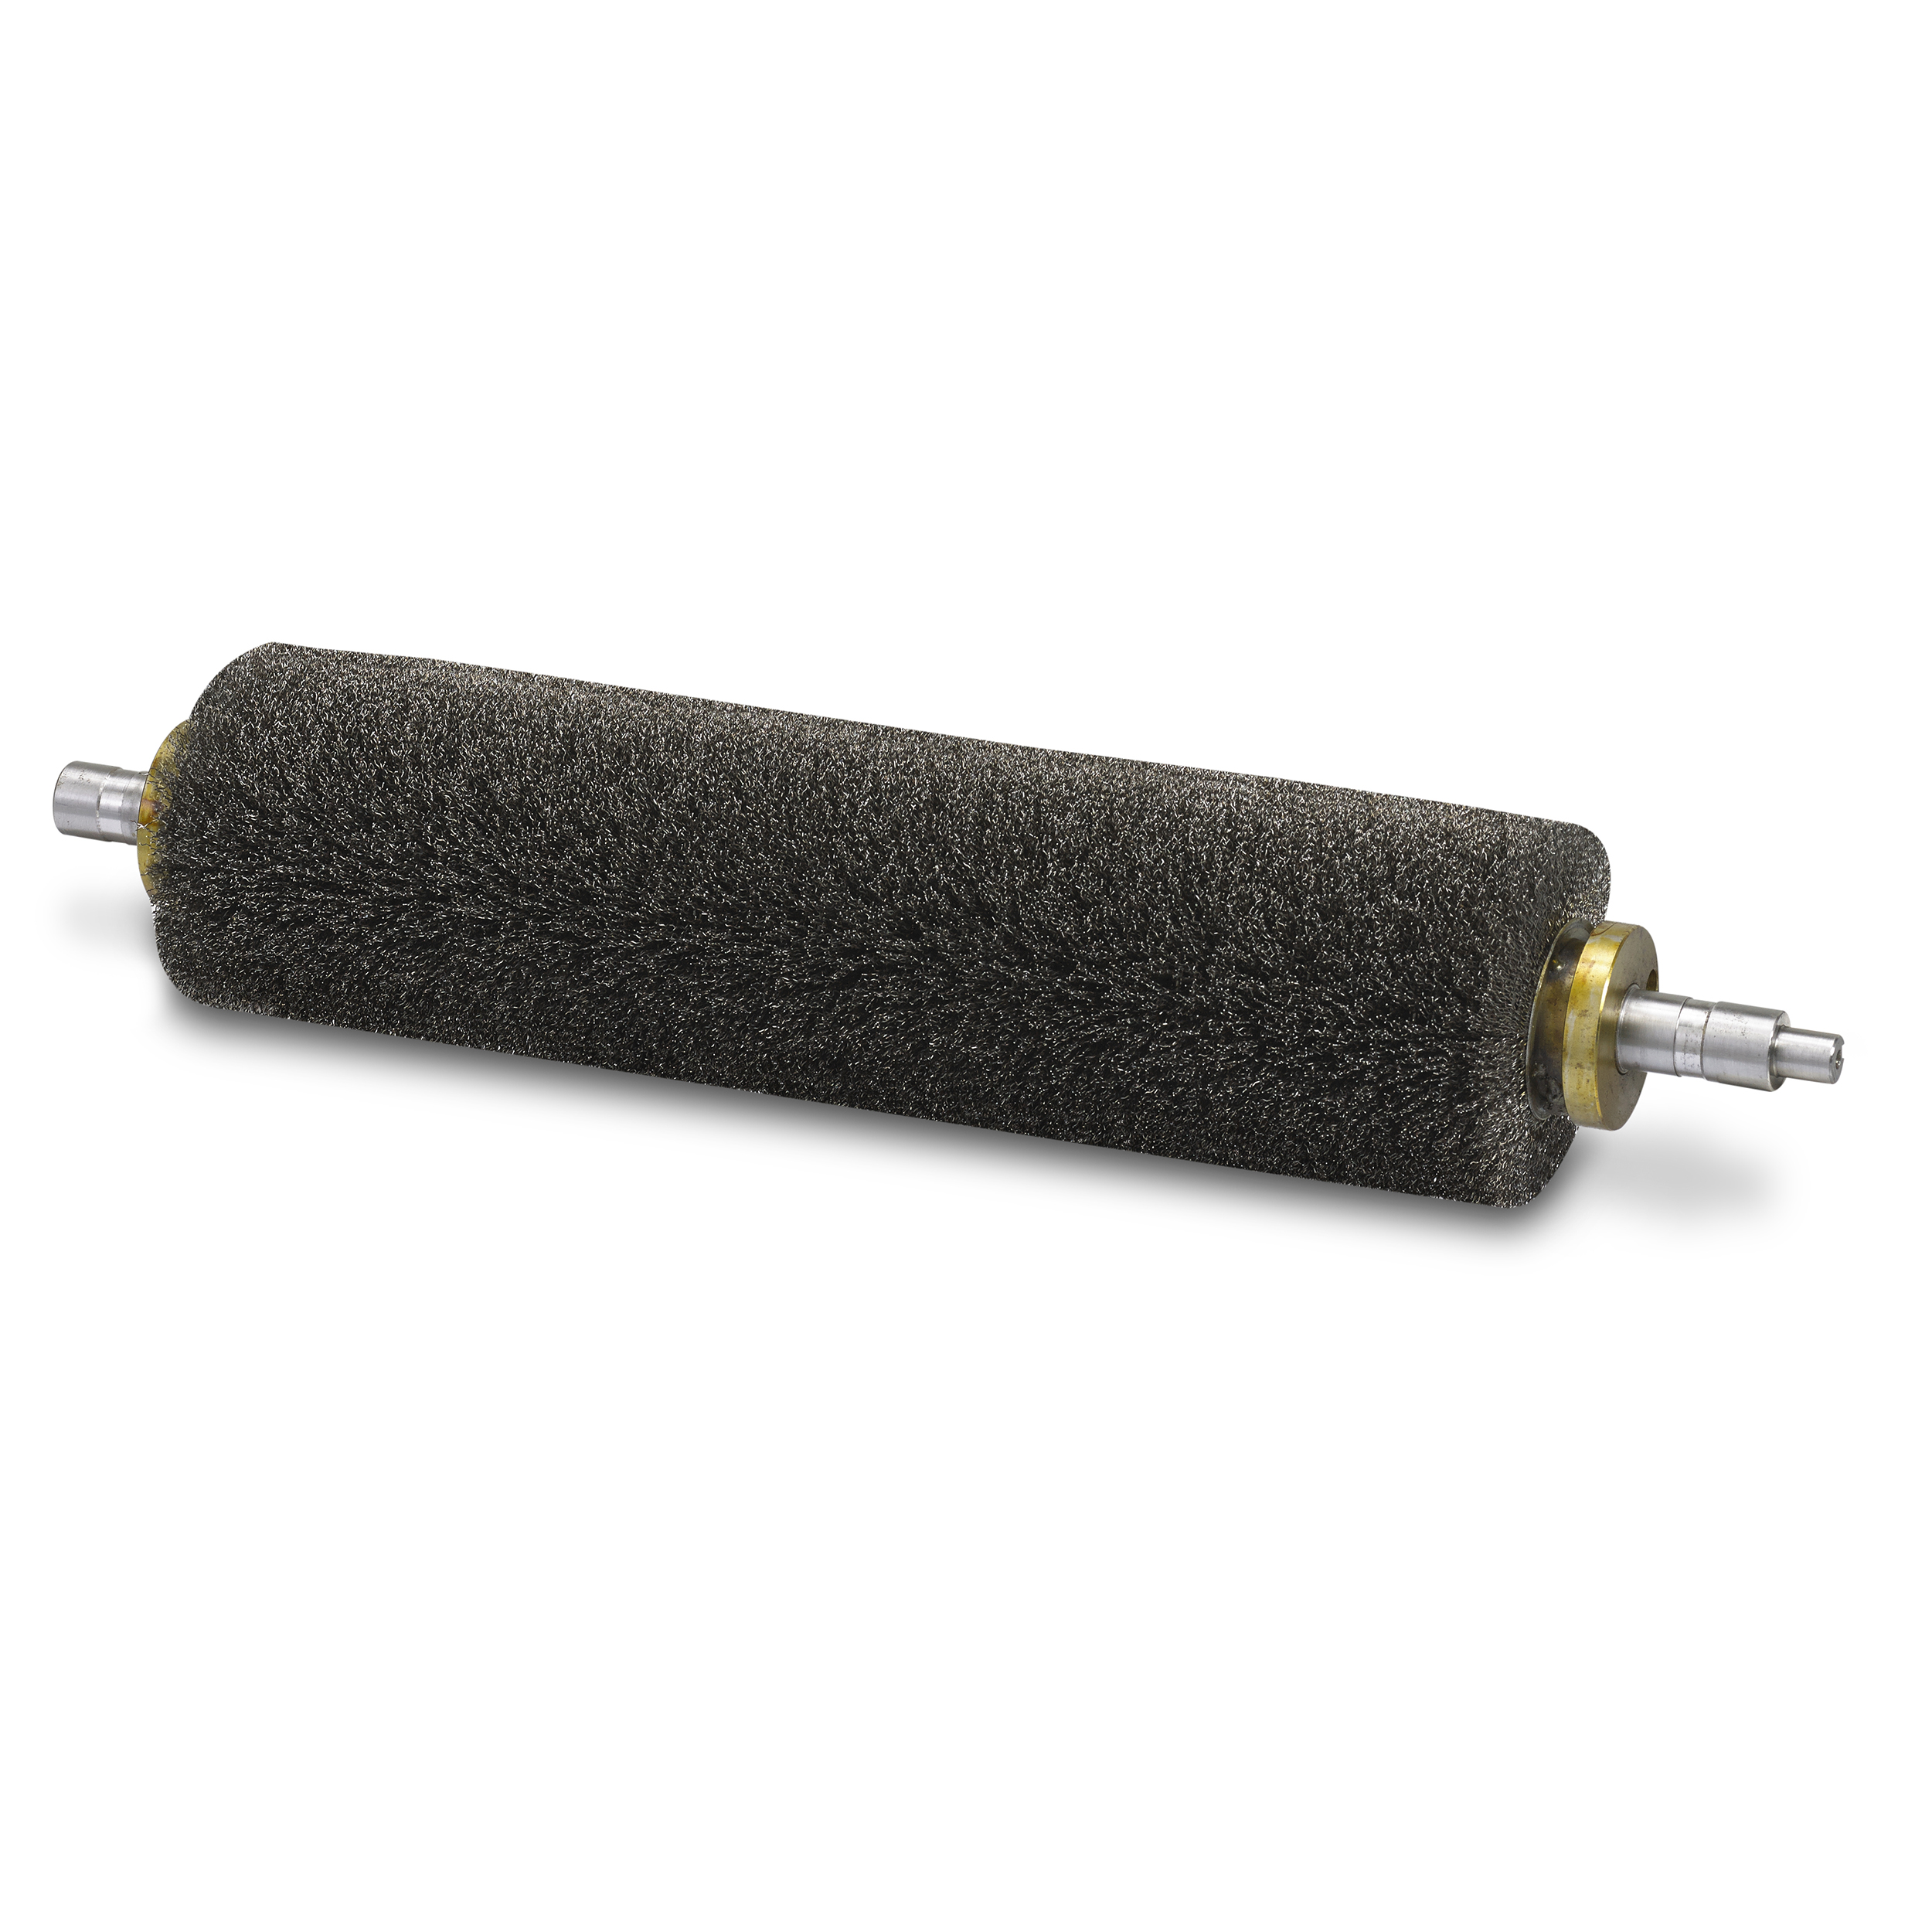 Optional Wire Brush For 19-38 Combination Sander